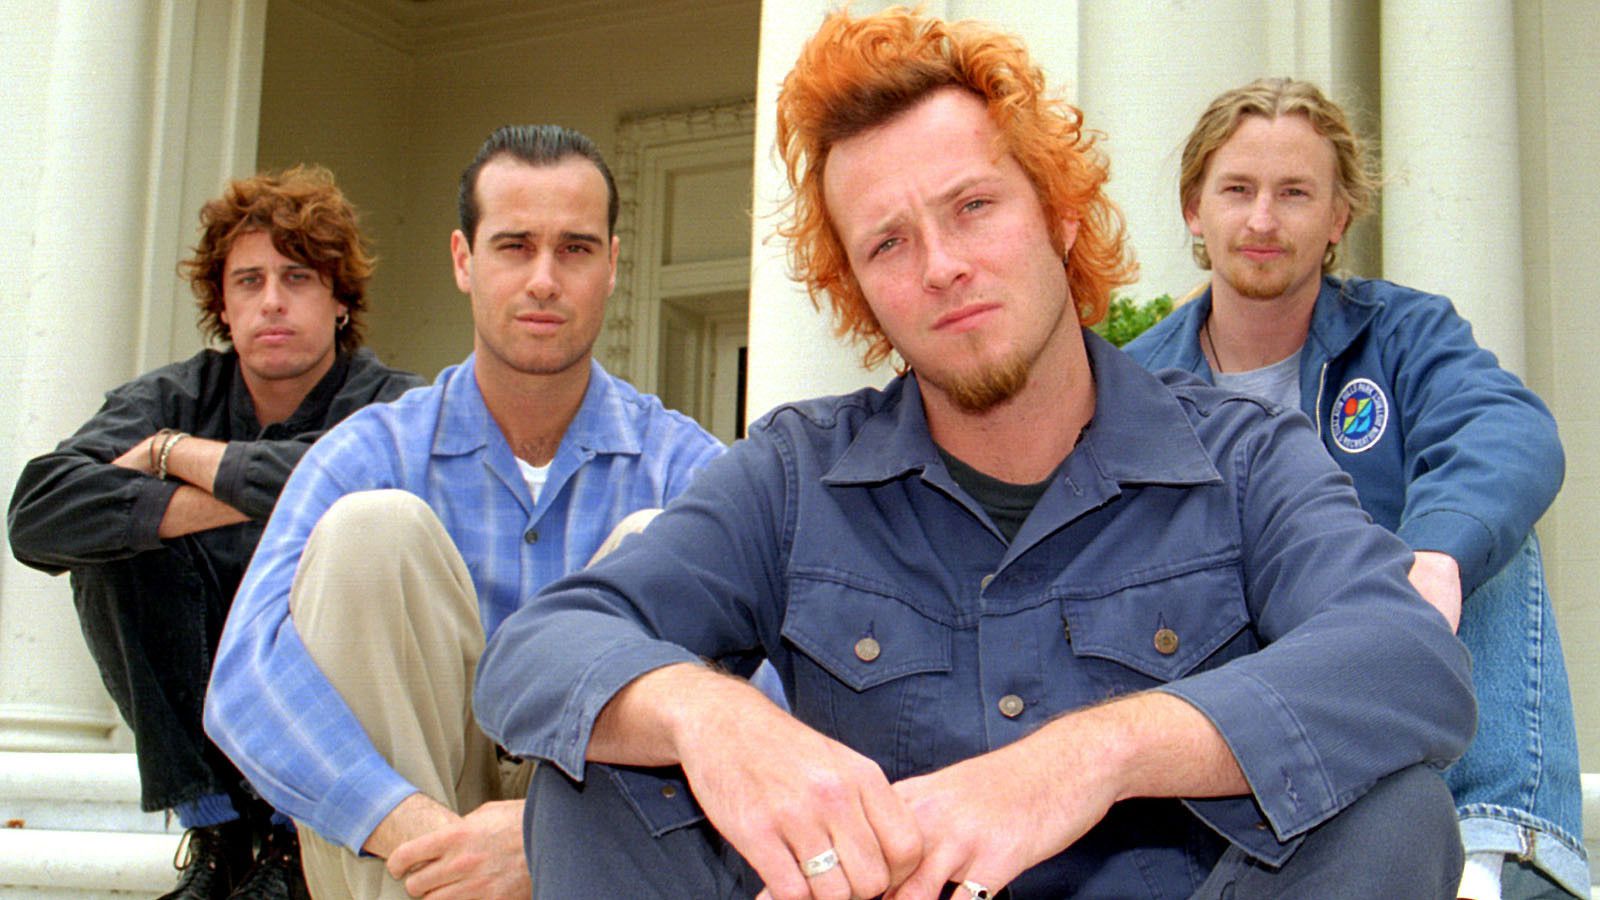 STONE TEMPLE PILOTS TO PERFORM PURPLE ALBUM IN ITS ENTIRETY — Amy